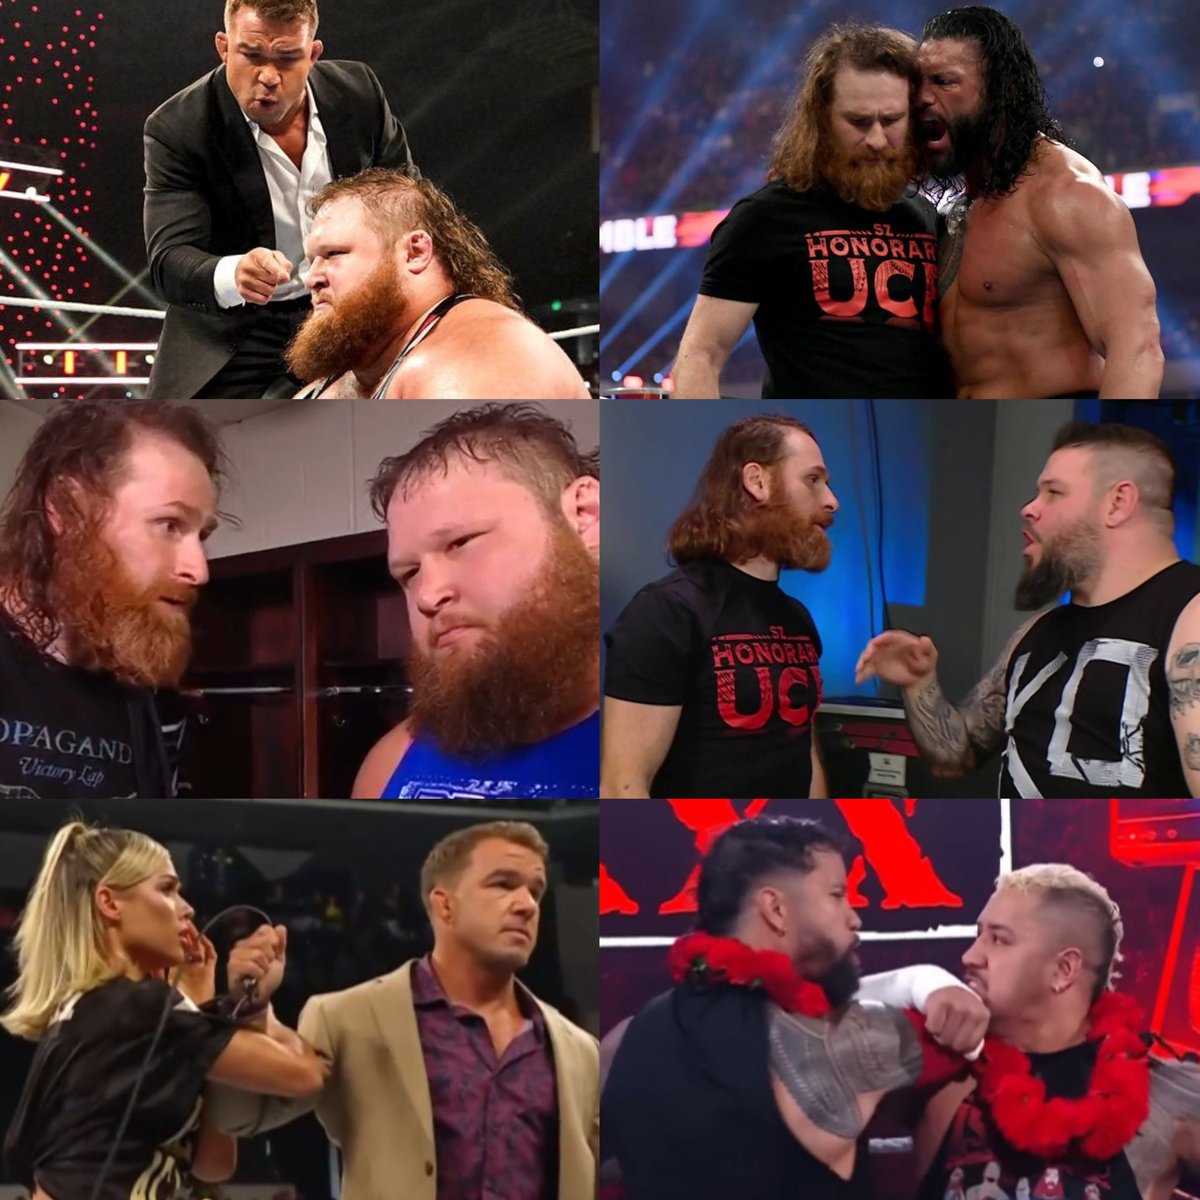 The Bloodline & Alpha Academy's storylines are very similar.

Chad Gable treating Otis badly like Roman Reigns did to Sami Zayn.

Sami trying to get through to Otis like KO did with him.

Maxxine stopping Gable's attack on Otis like Jey Uso stopped Solo Sikoa attacking Sami.